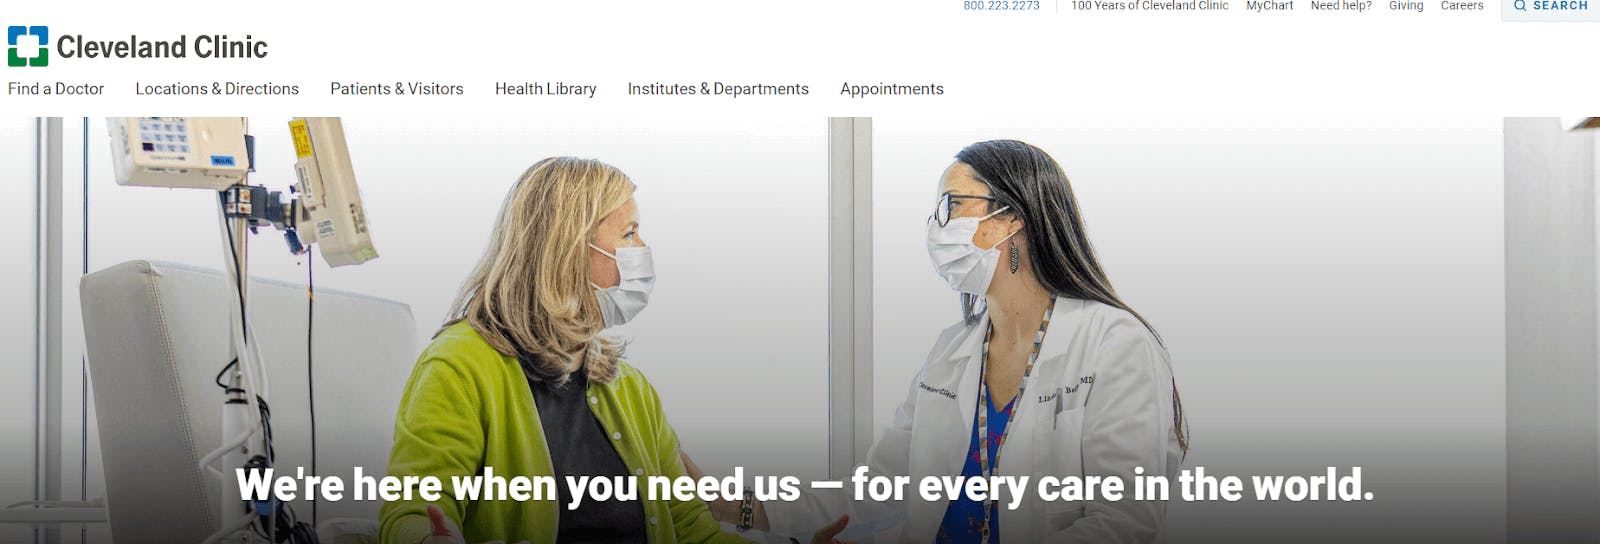 cleveland clinic website